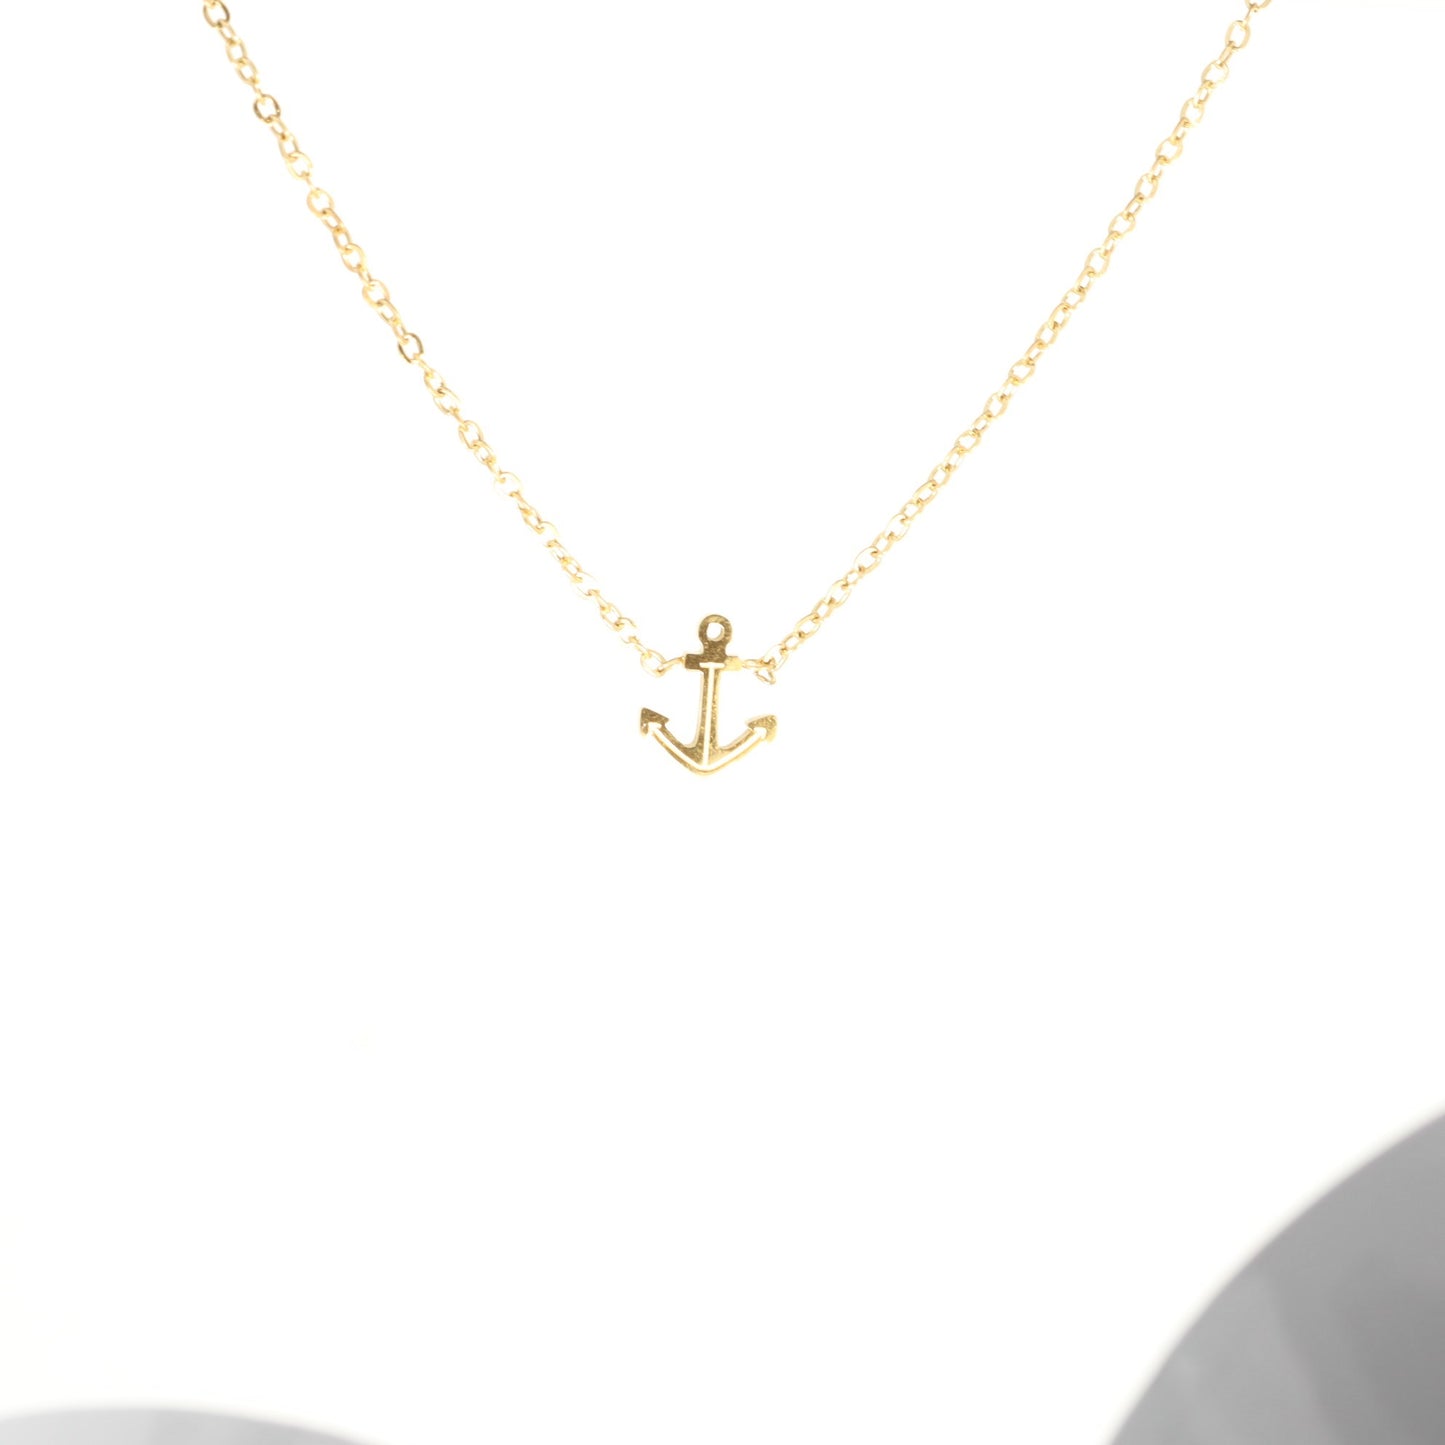 Small Anchor Necklace • Delicate Anchor Choker • Nautical Jewelry • Gold Anchor - Anya Collection